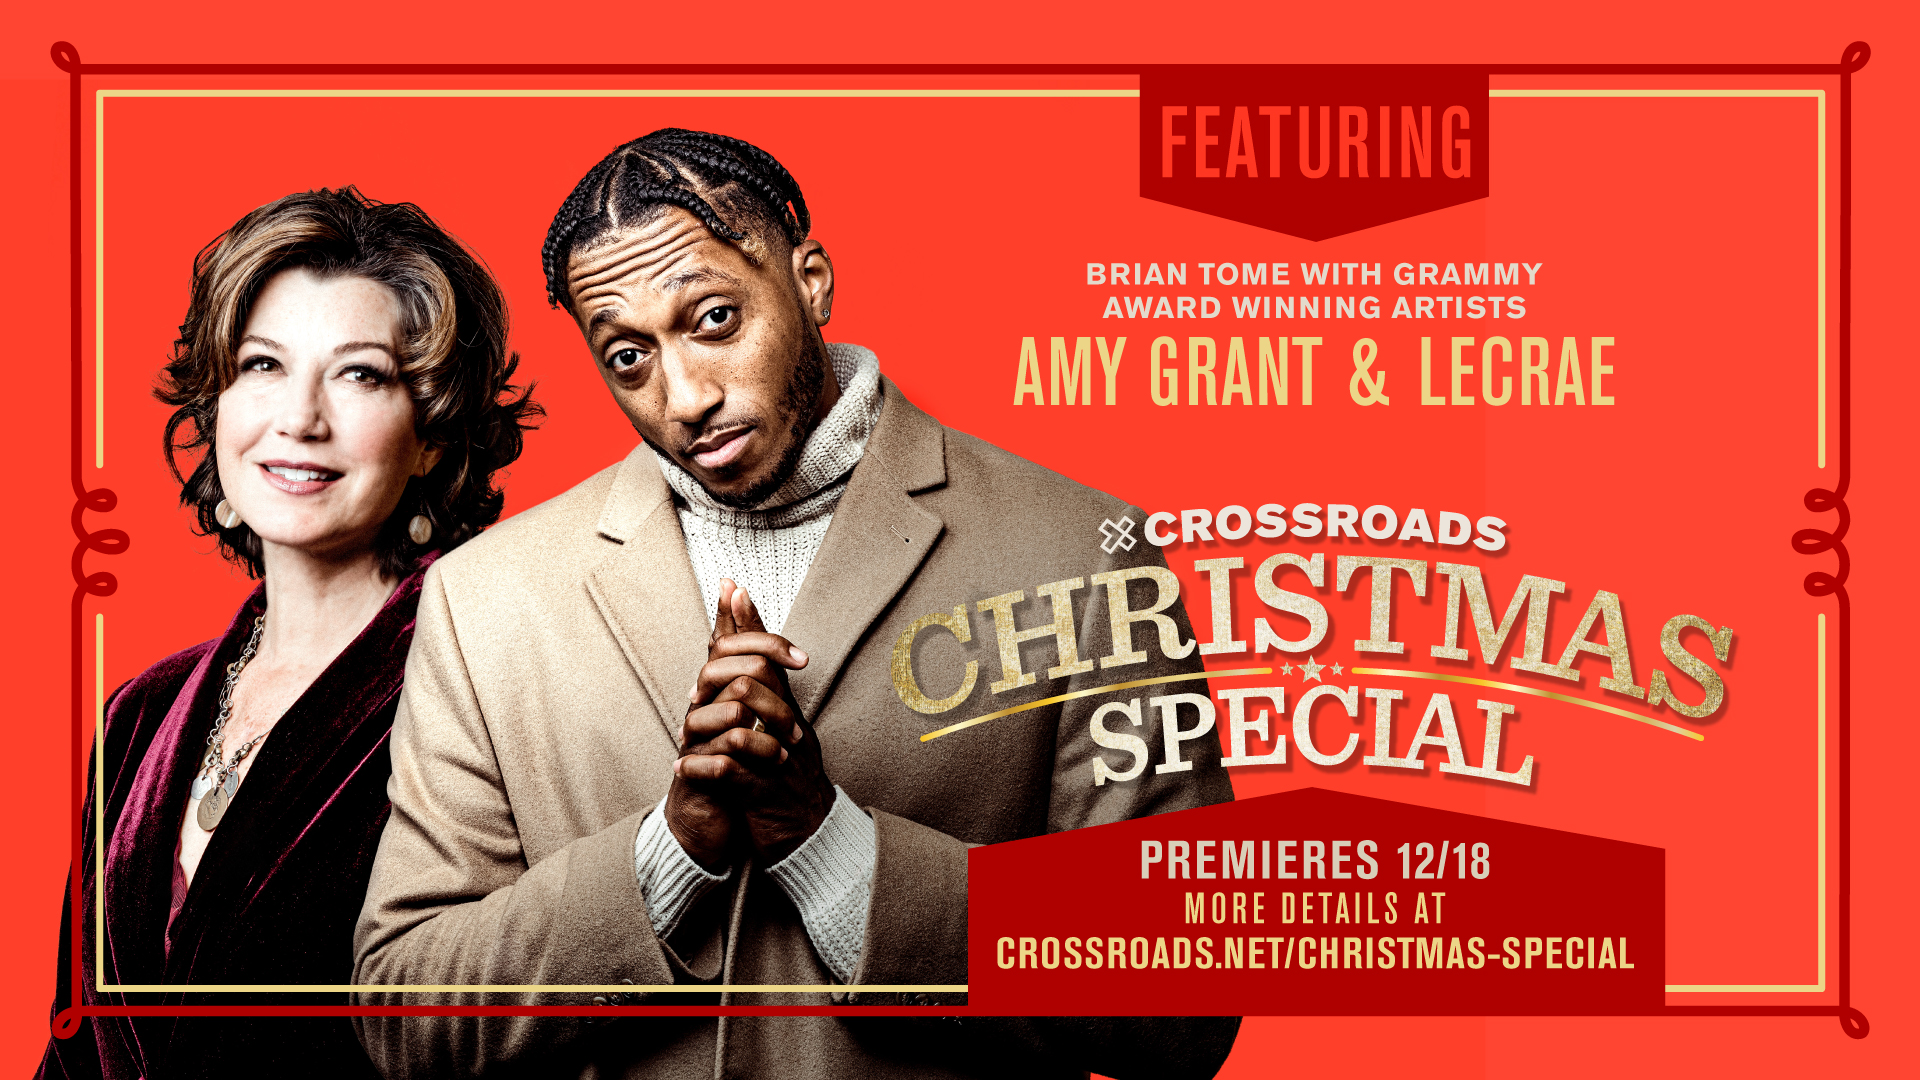 The Crossroads Christmas Special featuring Grammy Award-winning artists Amy Grant and Lecrae is available to provide an extra shot of hope throughout the Christmas season at crossroasds.net/christmas-special.